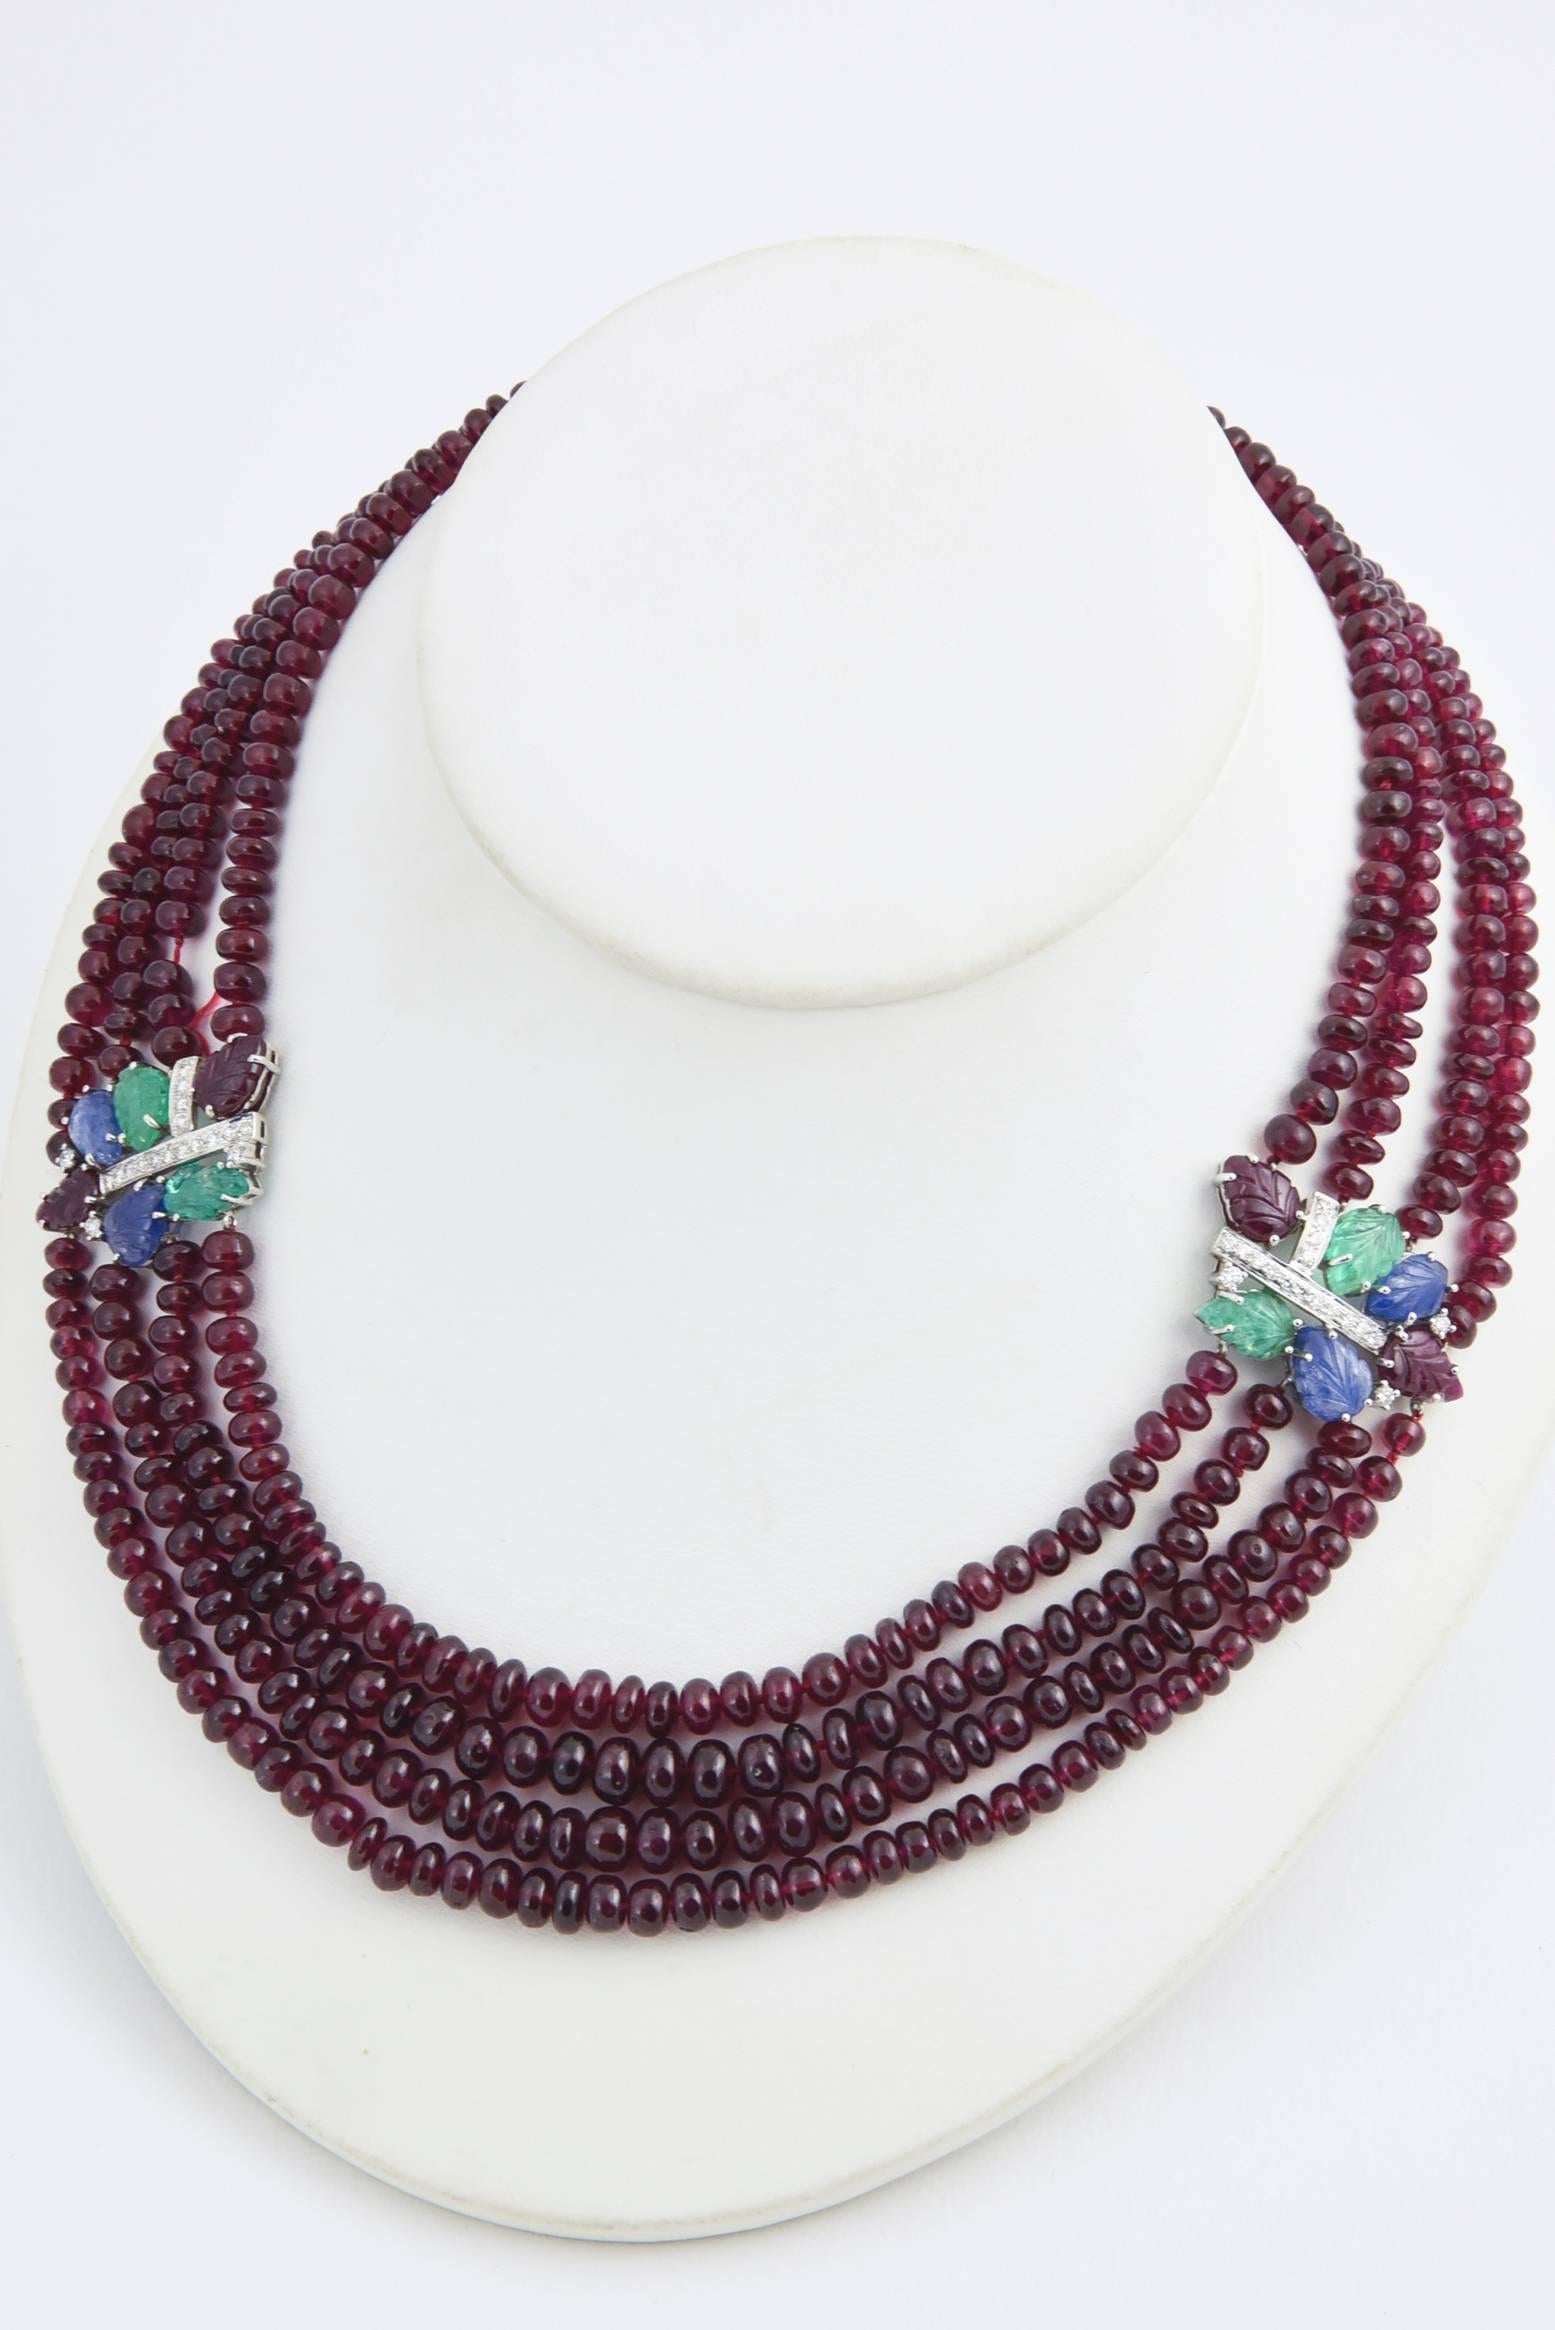 Impressive contemporary necklace containing four strands of ruby beads accented with two - 18k white gold tutti frutti spacers.  The spacers have carved ruby, emerald and sapphire leaves and diamonds.  At the back, there is a pave diamond 14k white